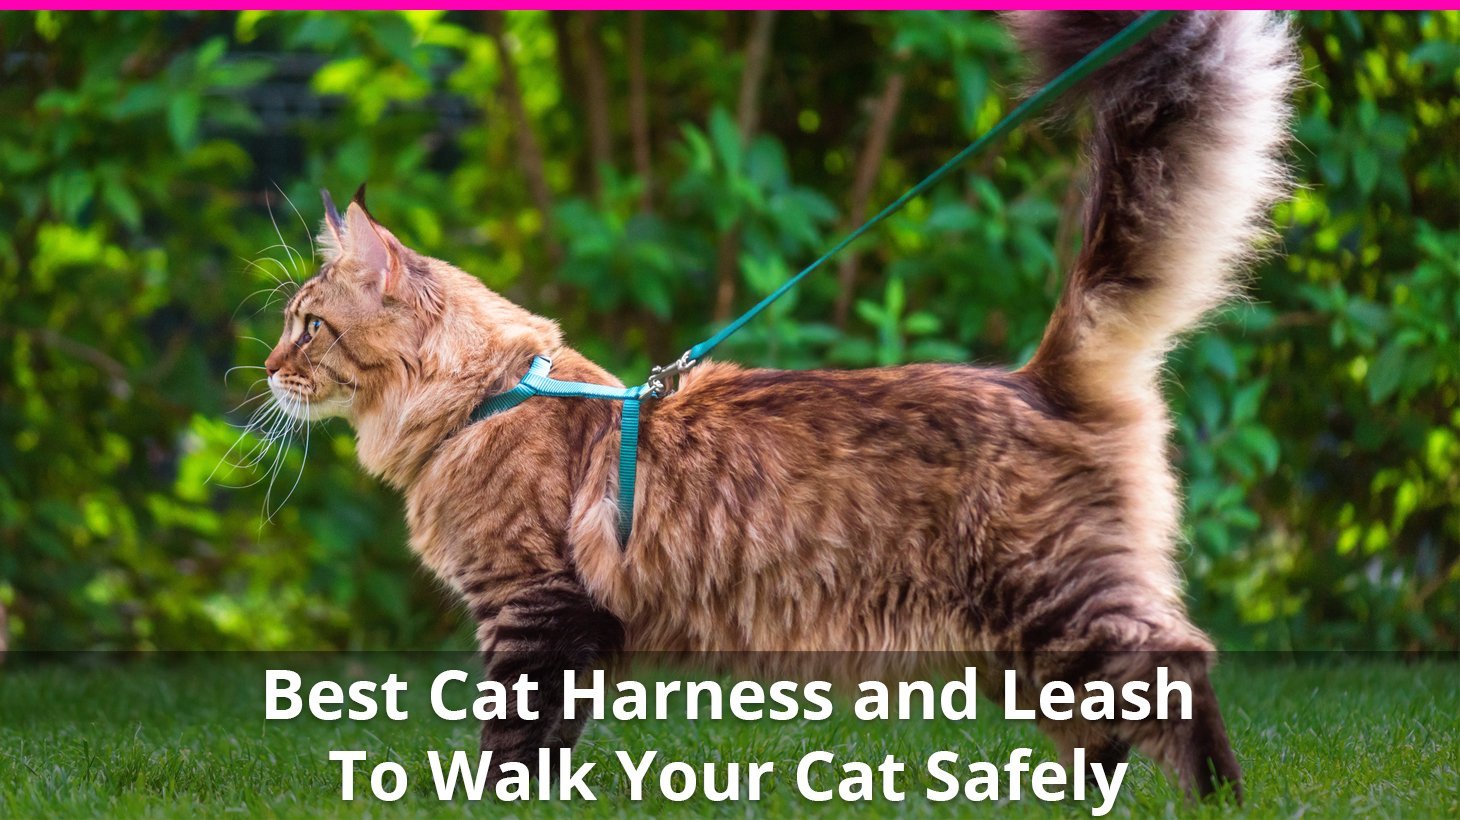 Unihubys Cat Harness with Leash Set Adjustable Soft Mesh Material with Strong D-Ring for Peace of Mind Great for Walking 